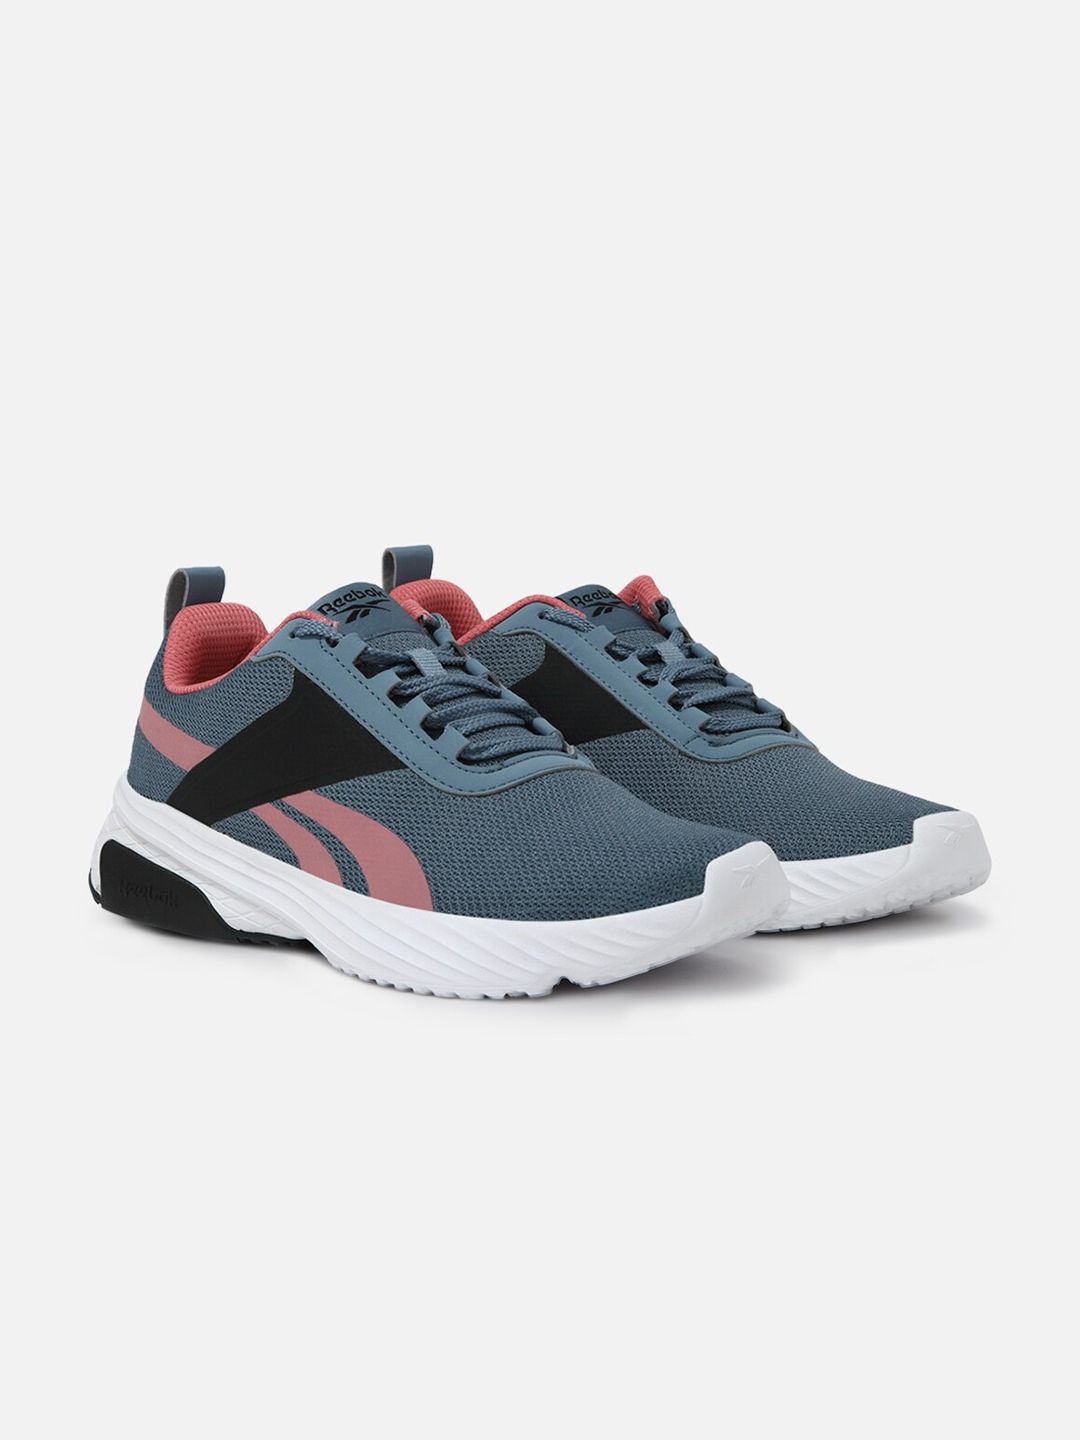 Reebok Women Running Fast Approach 2.0 W Shoes Price in India